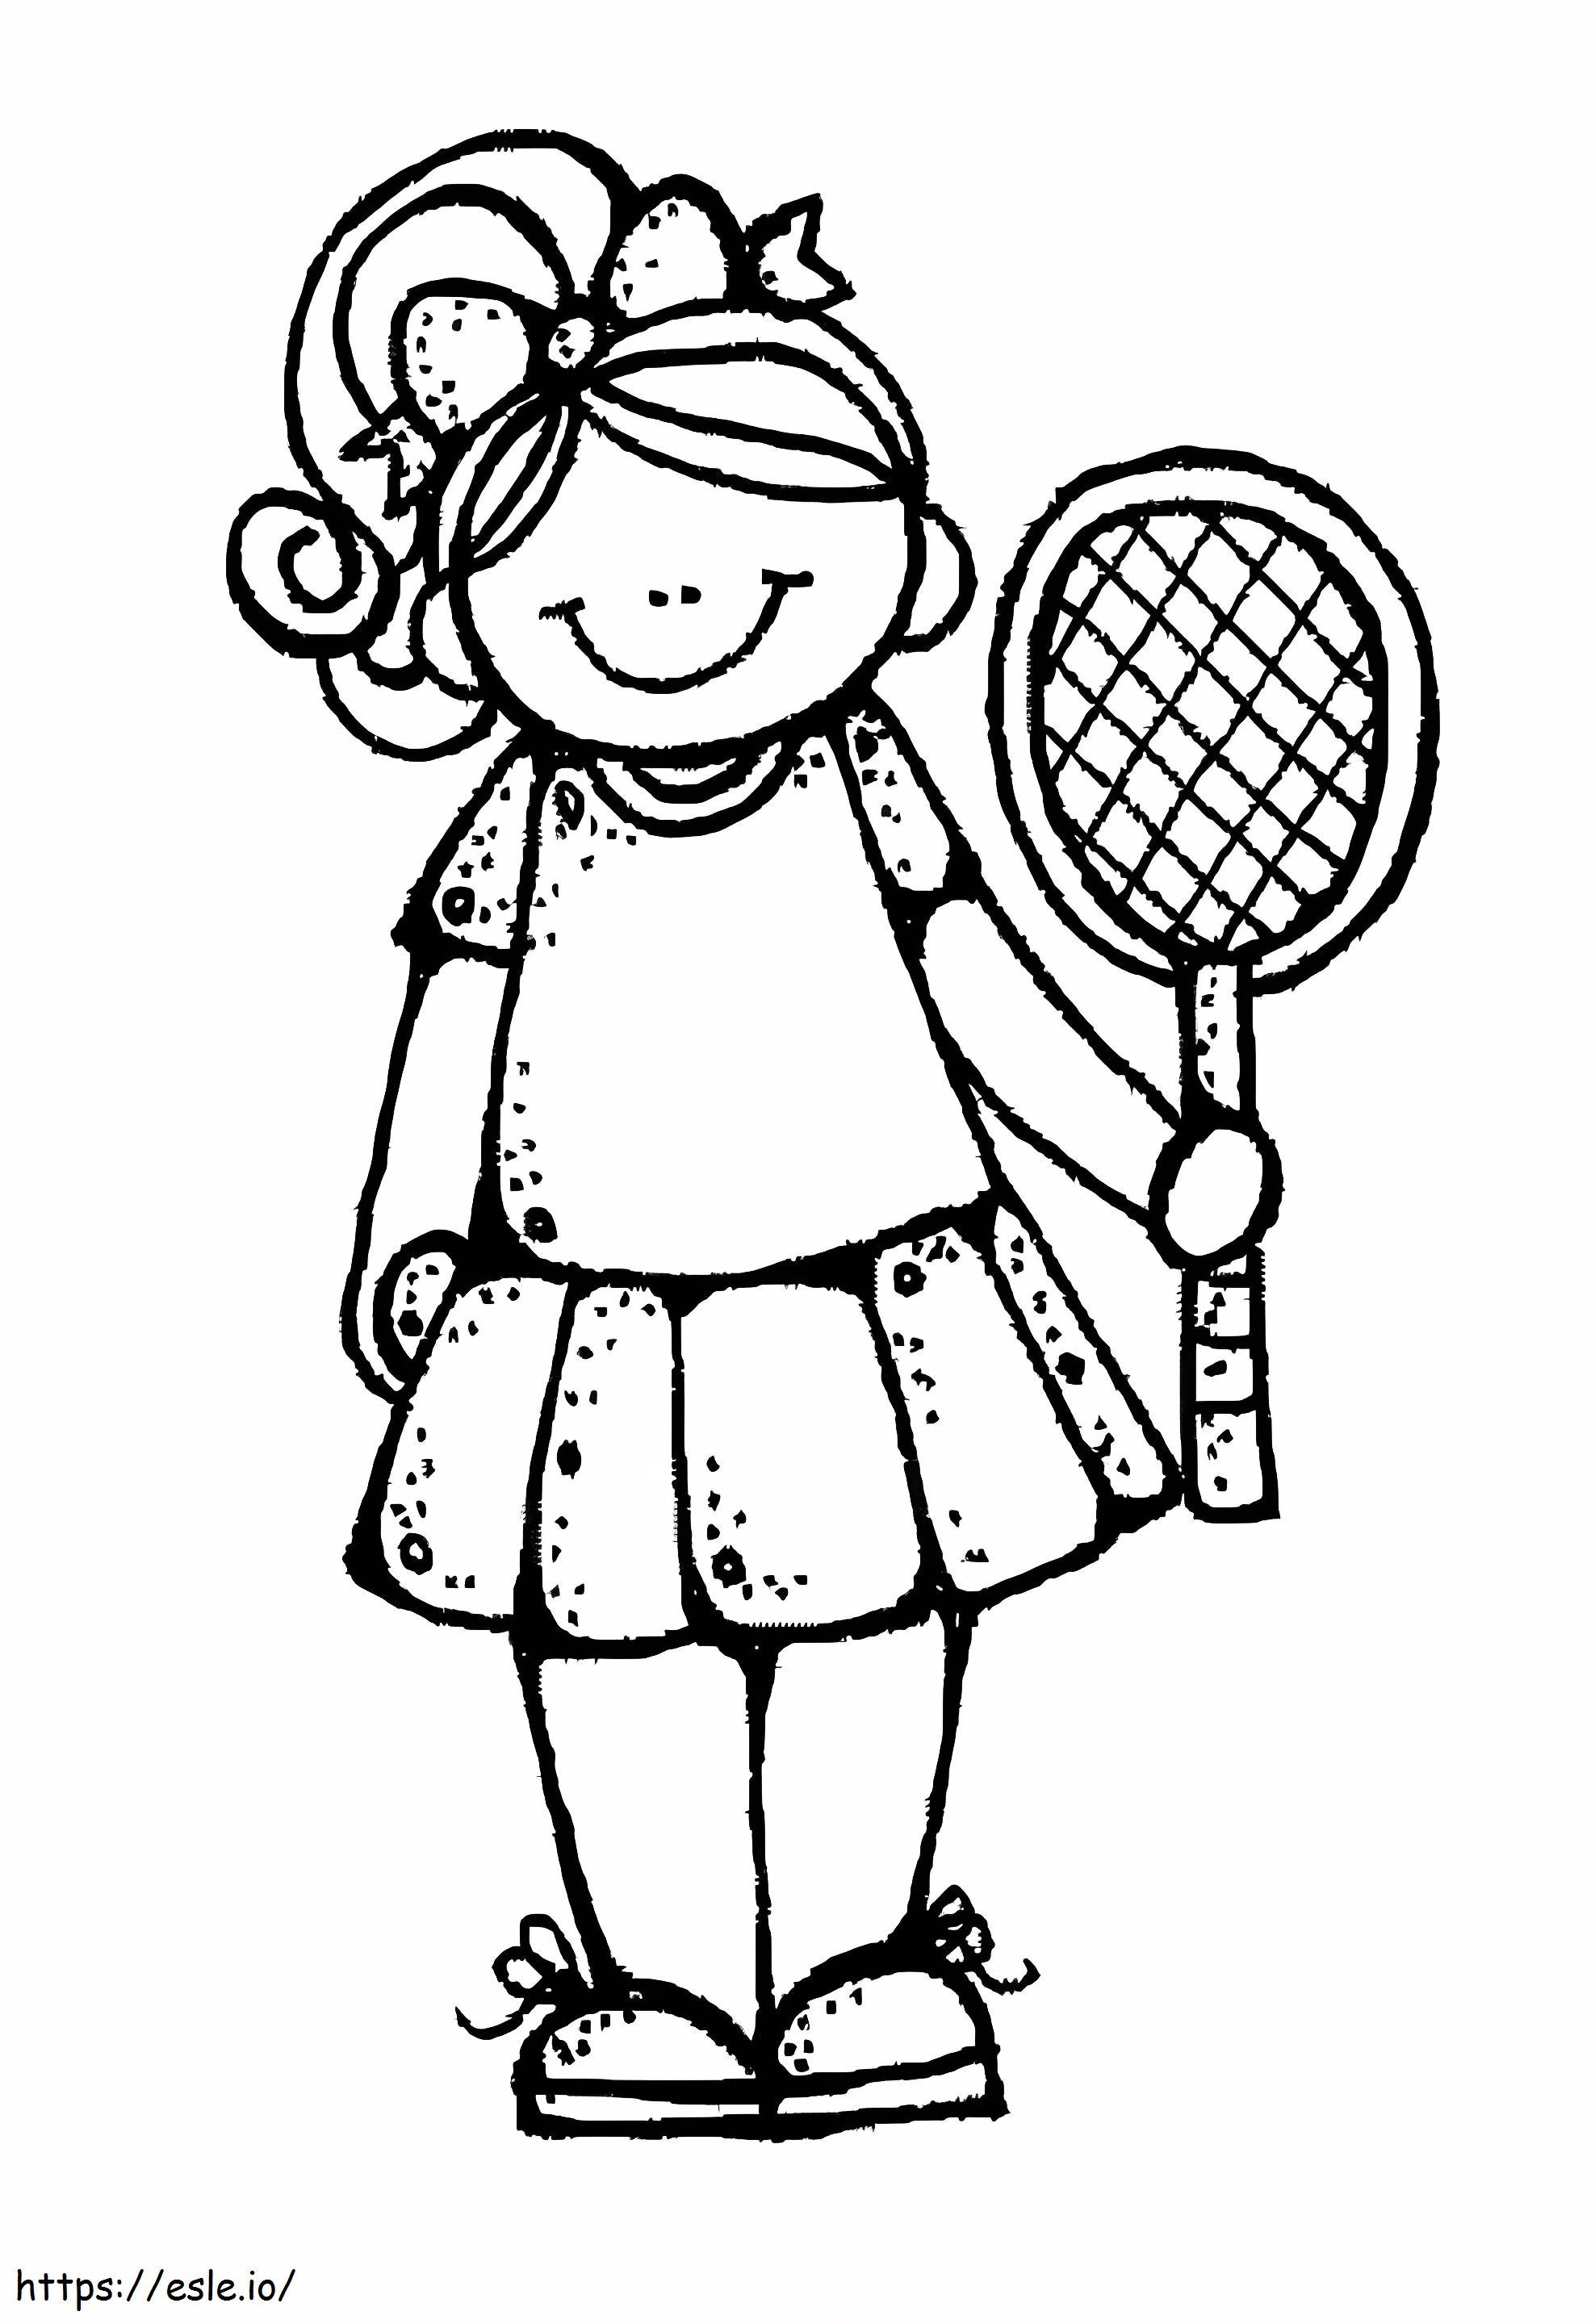 Tennis Girl Melonheadz coloring page